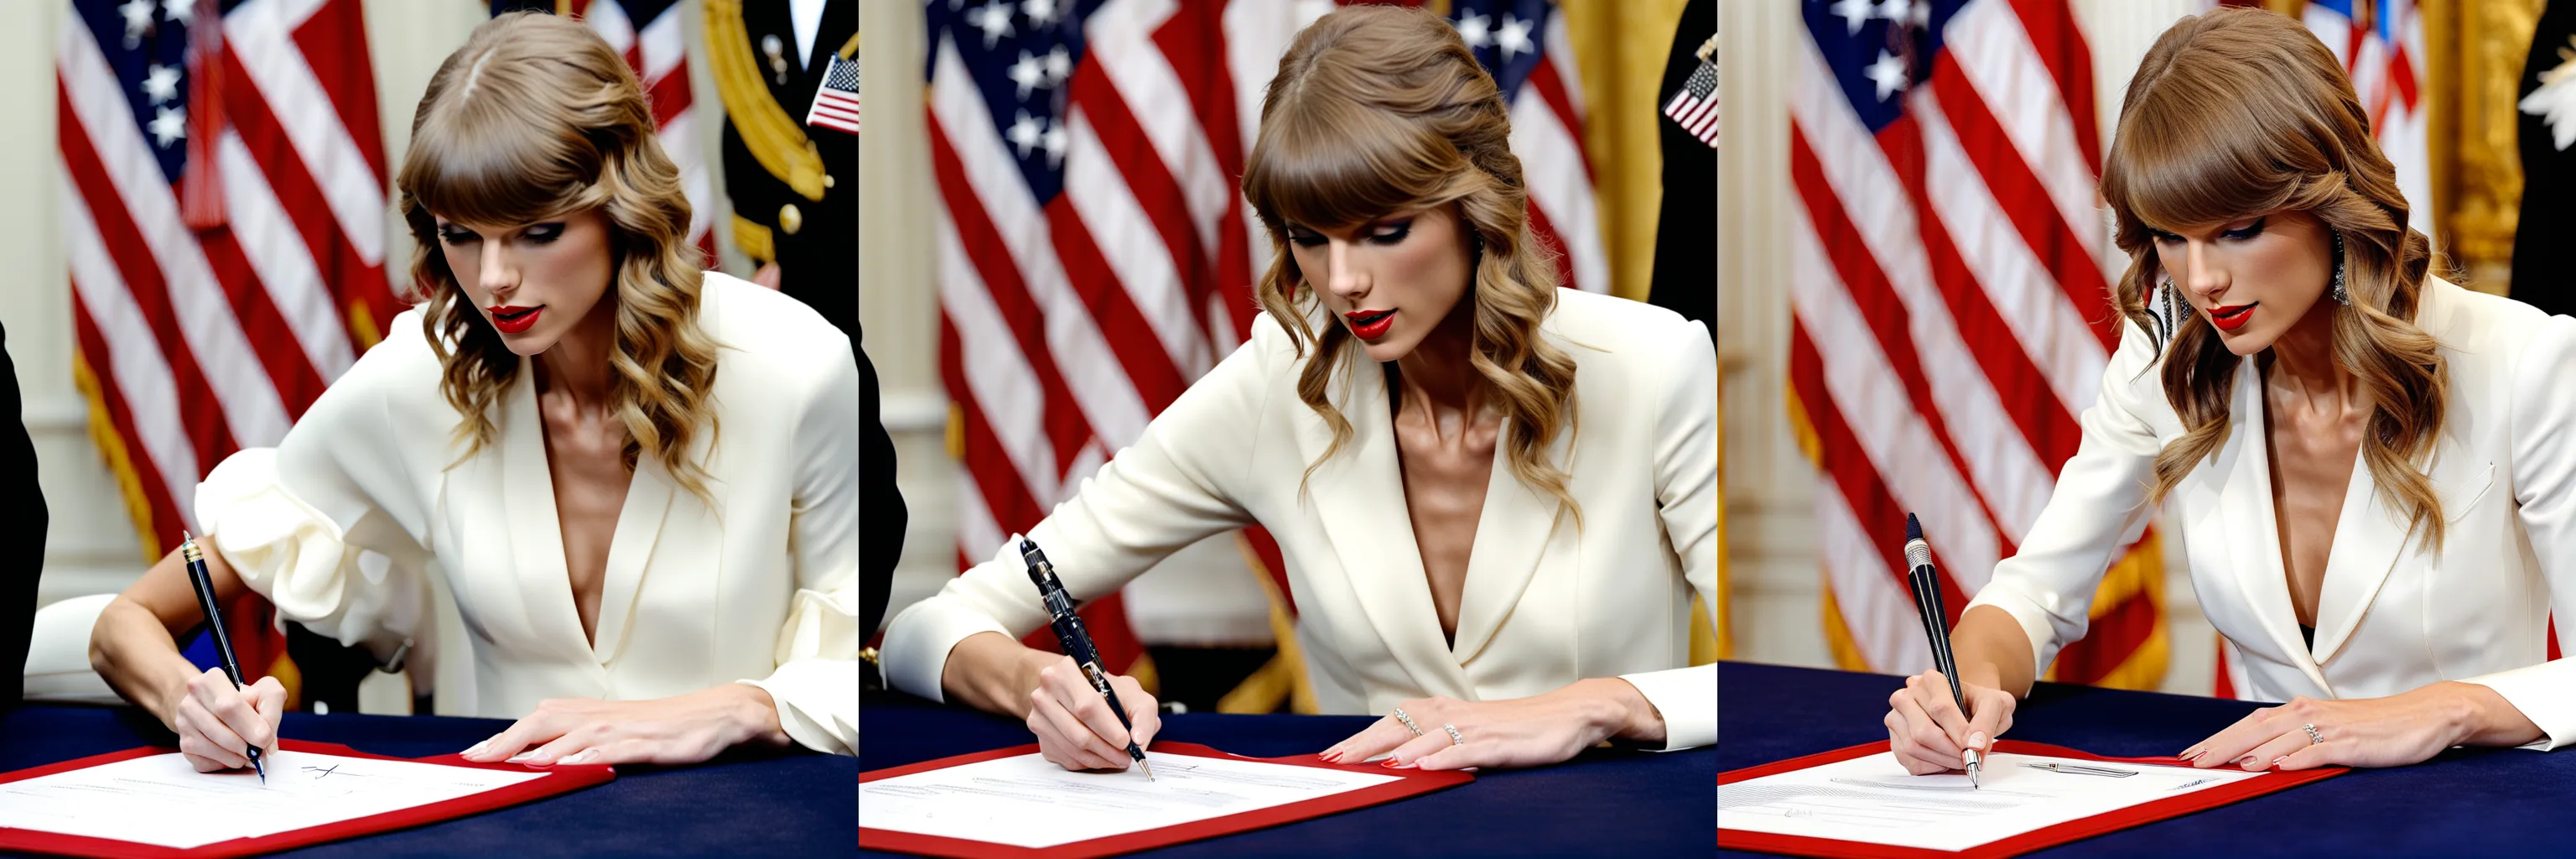 USA President Taylor Swift (signing papers)++++, photo taken by the Associated Press